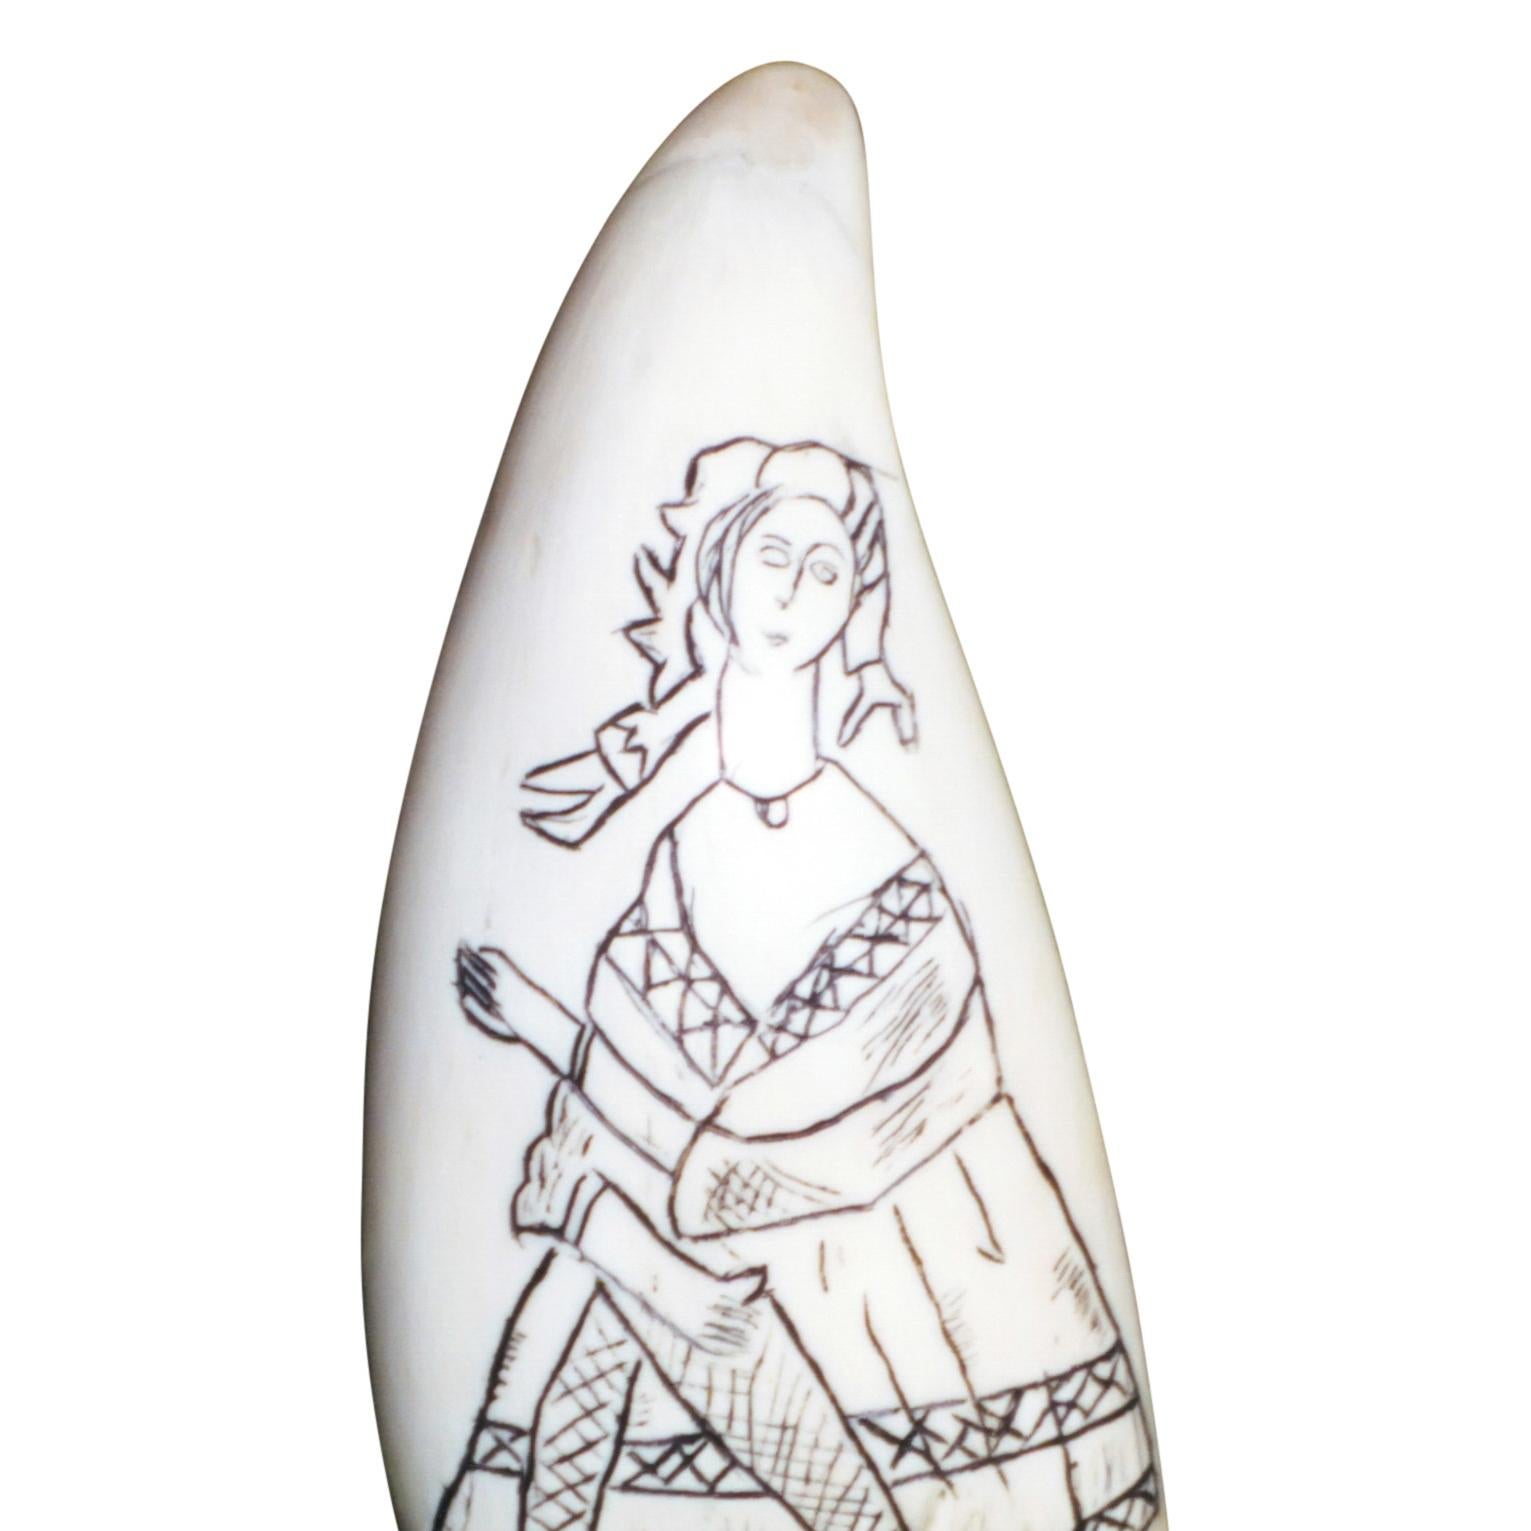 Irish Folk Art. This sperm whale tooth was etched during the 19th century, in Ireland. There'sa a drinking sailor on one side, and a barmaid on the other - 